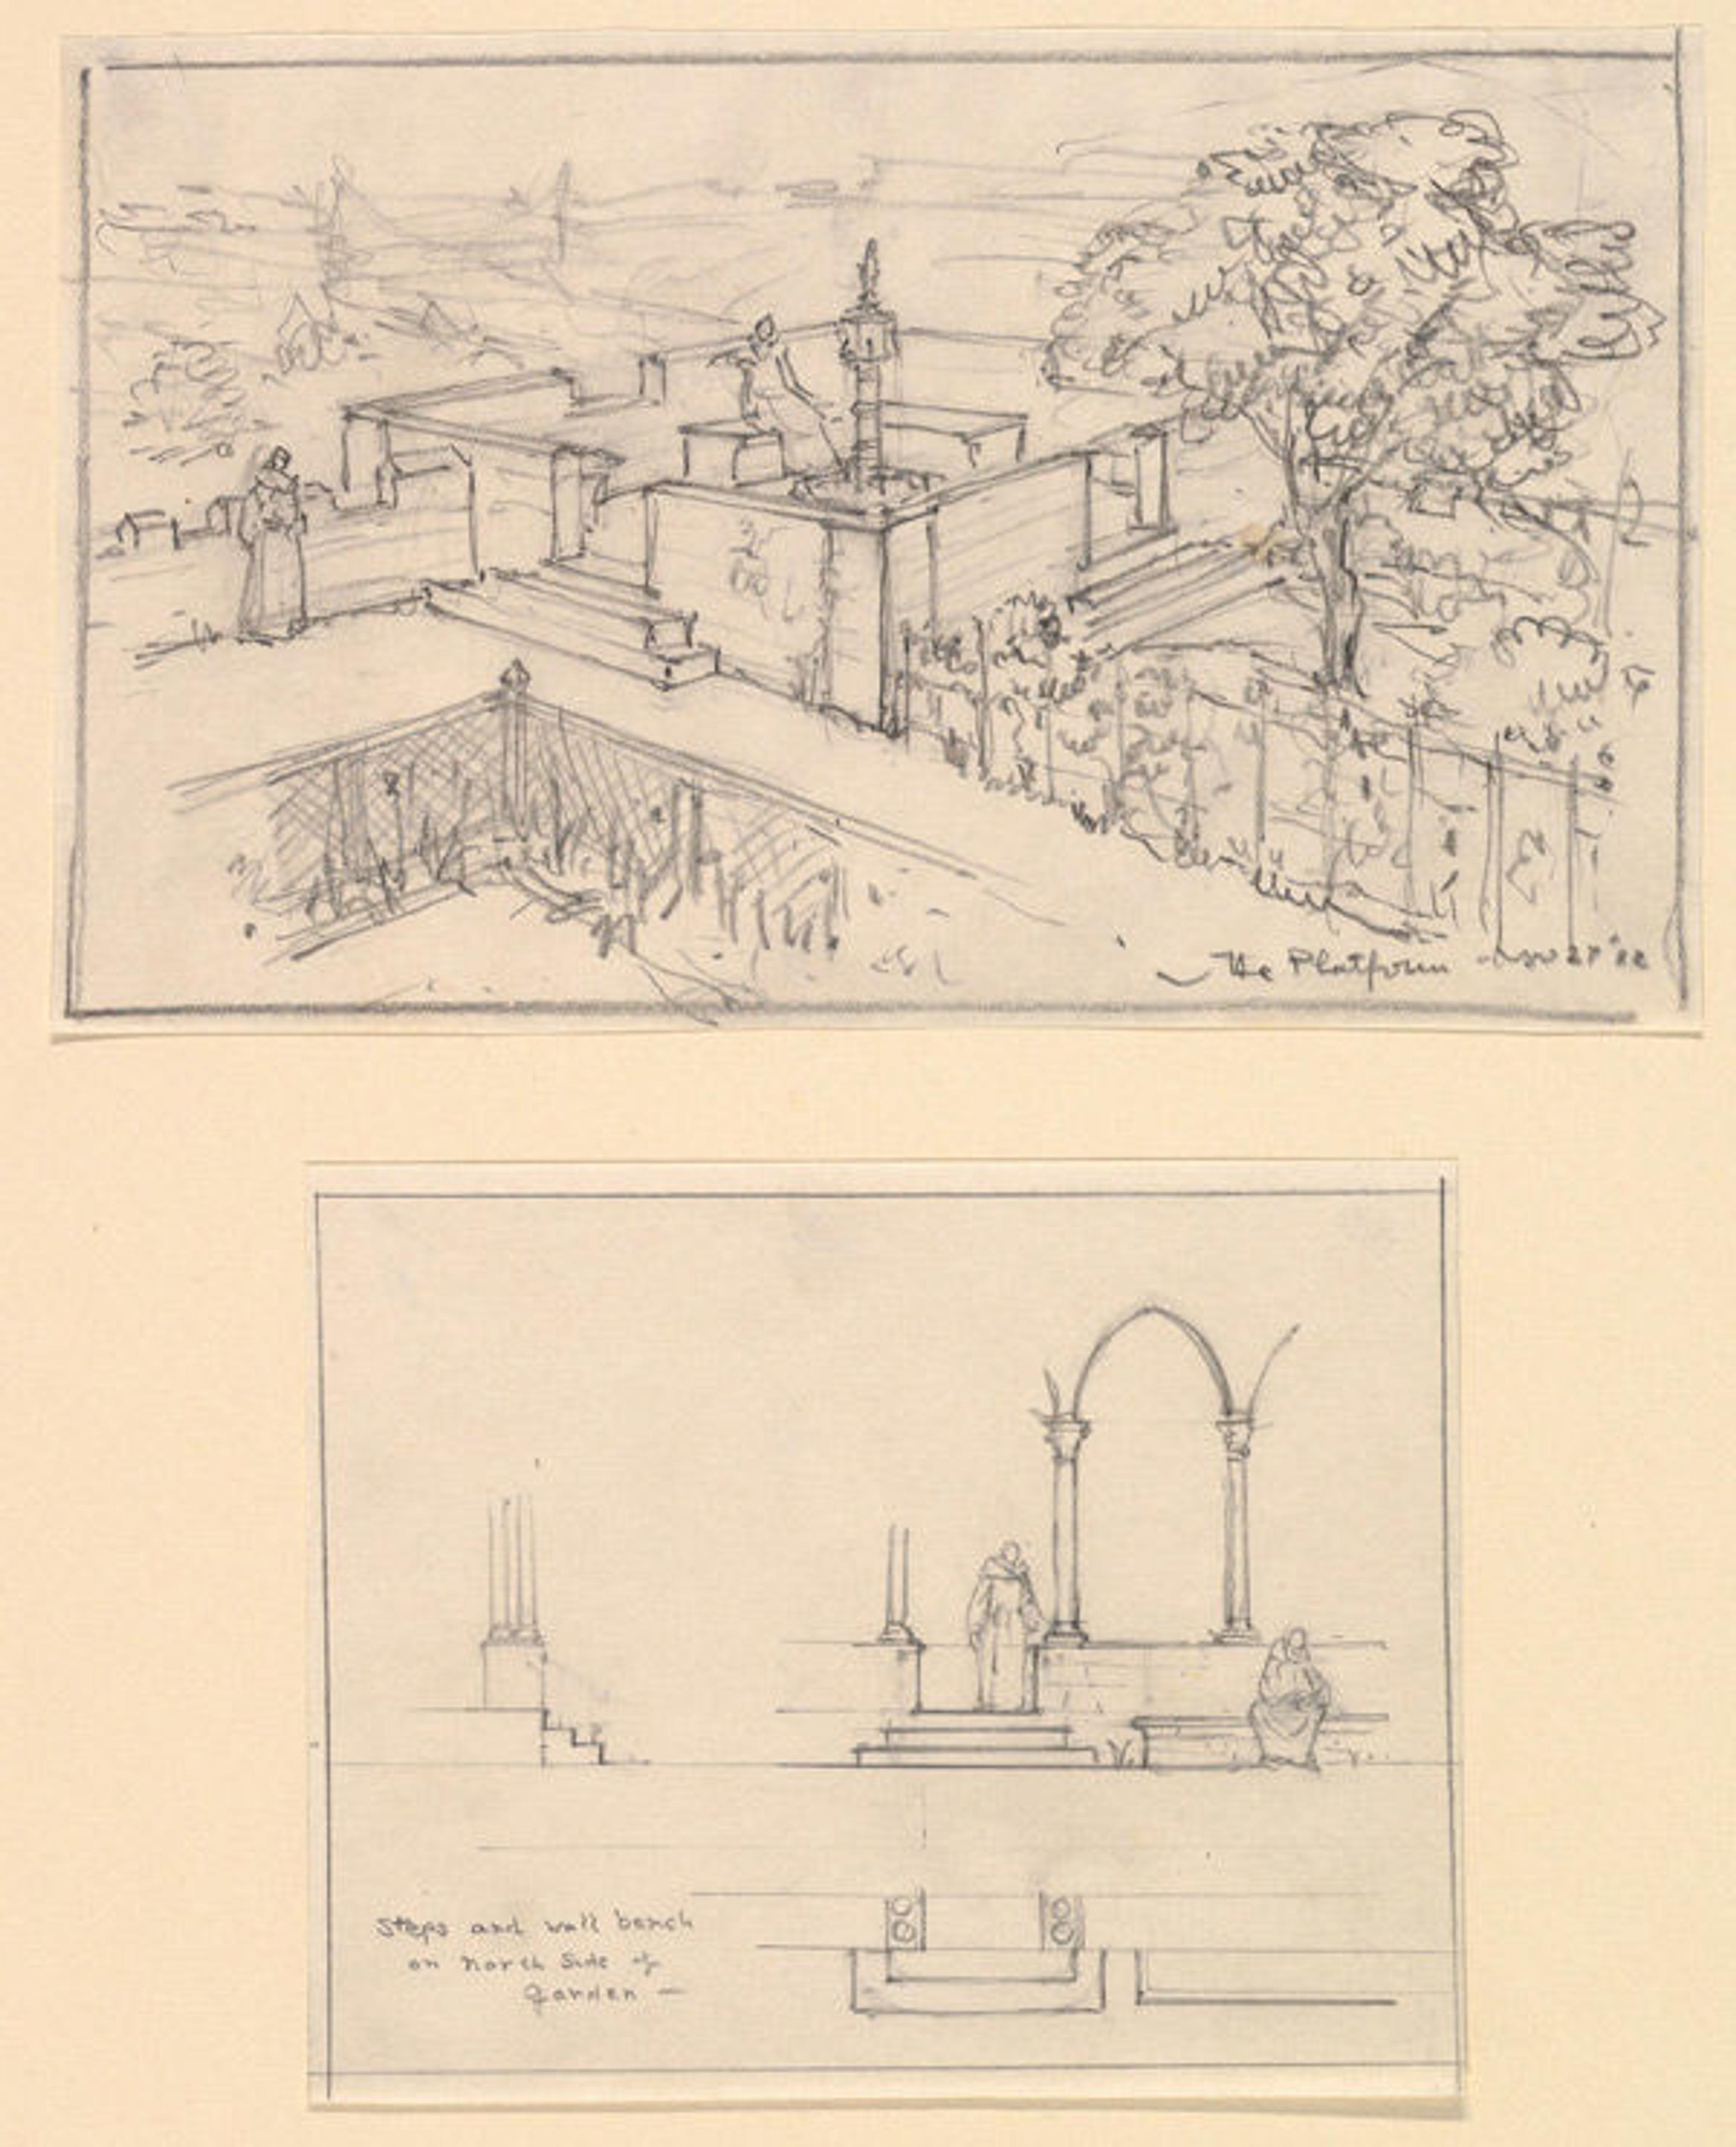 Joseph Breck (1885–1933). Design showing the raised platform with fountain at southwest corner of Bonnefont Cloister garden and steps on the north side, dated November 27, 1932.